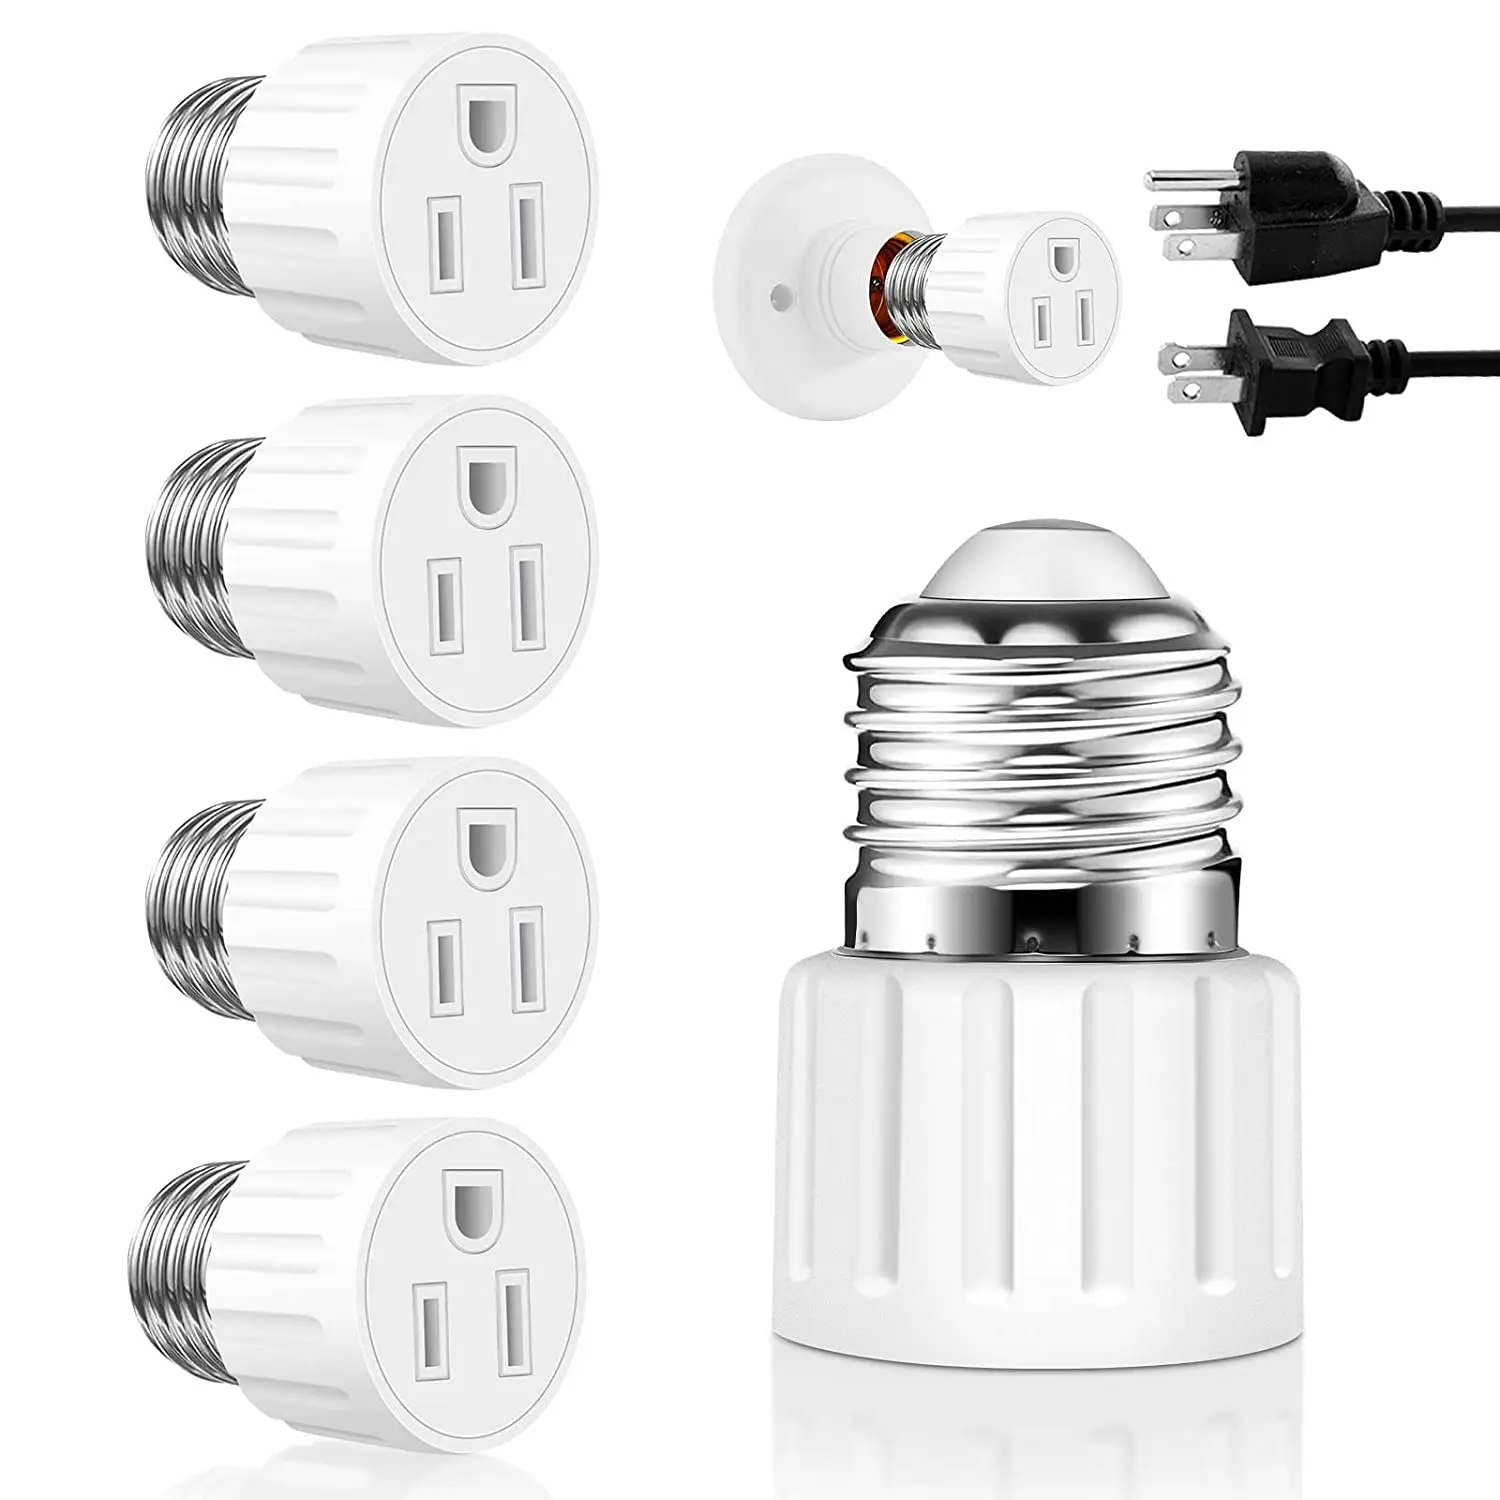 2 Packs E26 E27 Light Socket to Plug Adapter Polarized Screw in Outlet for Adapter 2 / 3Prong Convert Porch Patio Garage